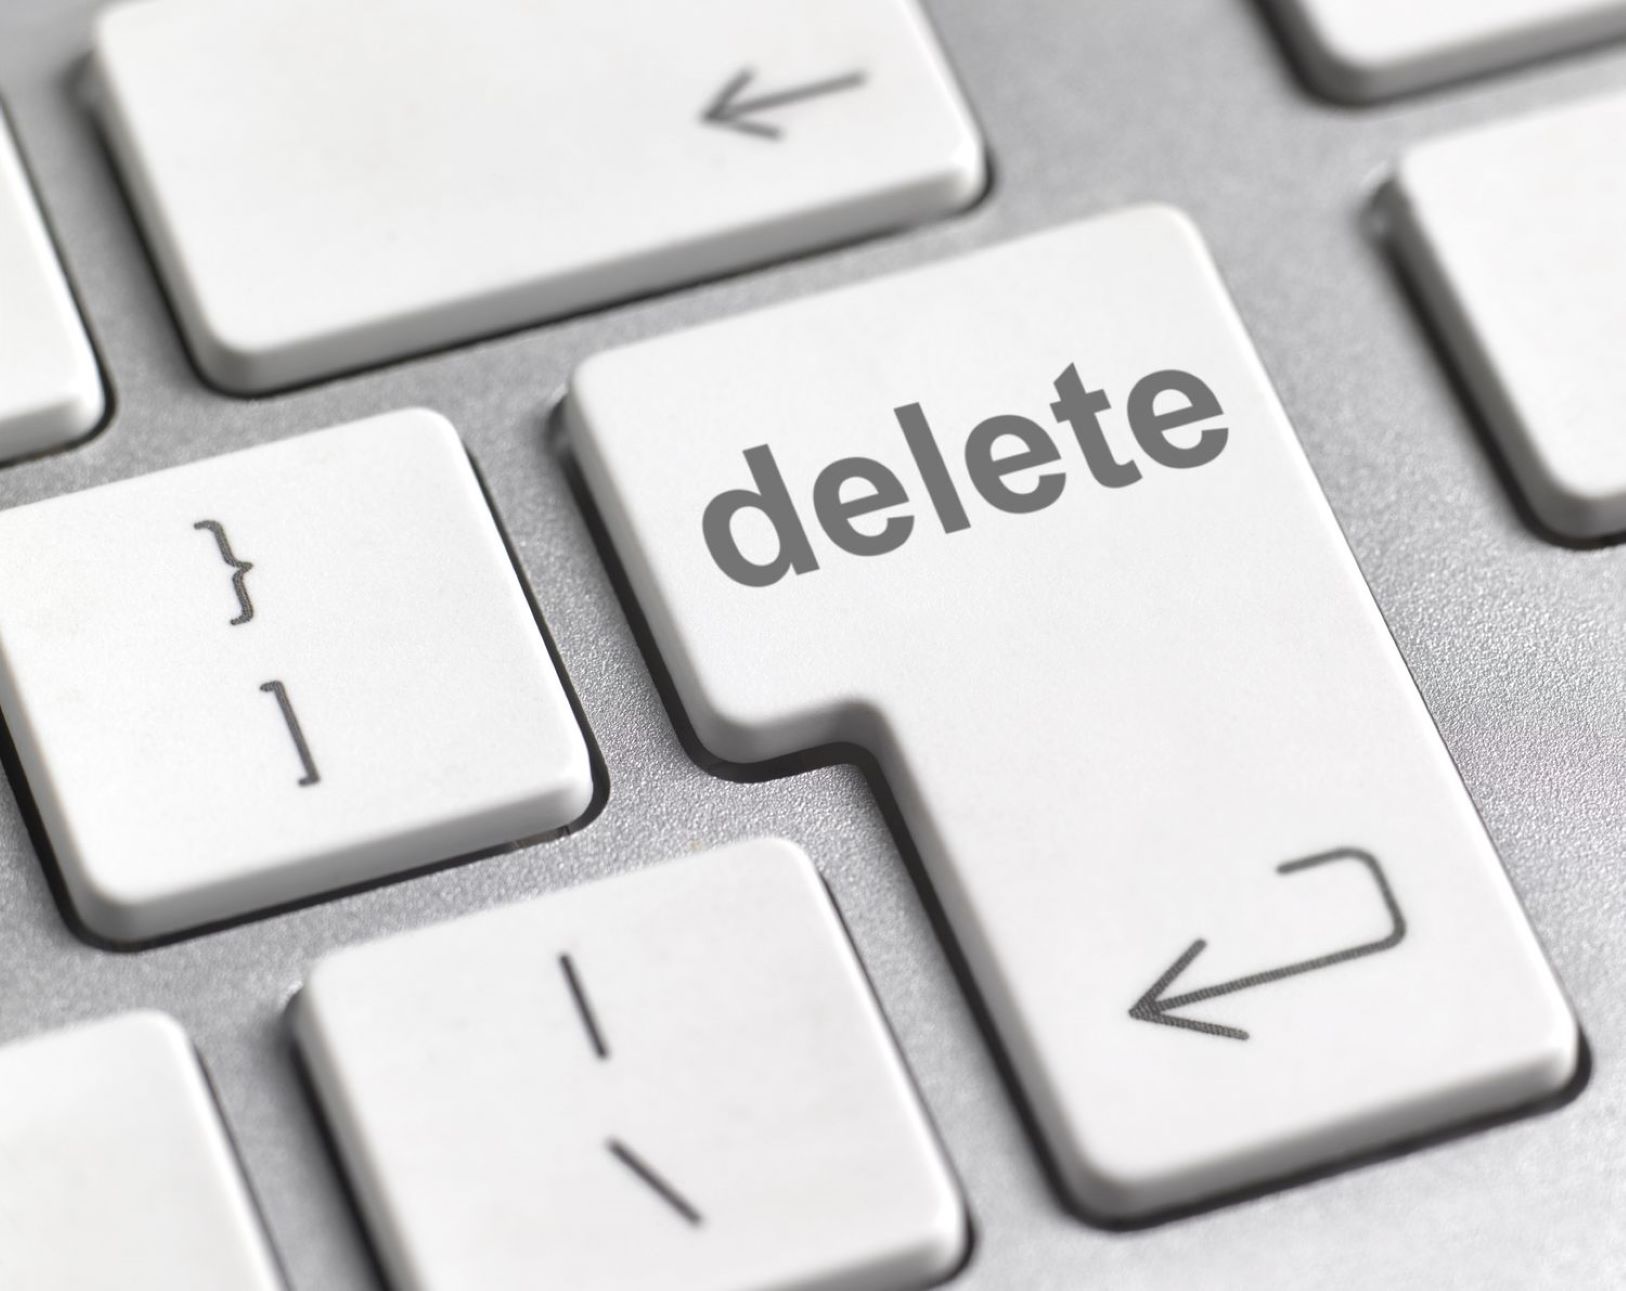 how-to-force-delete-a-file-on-windows-10